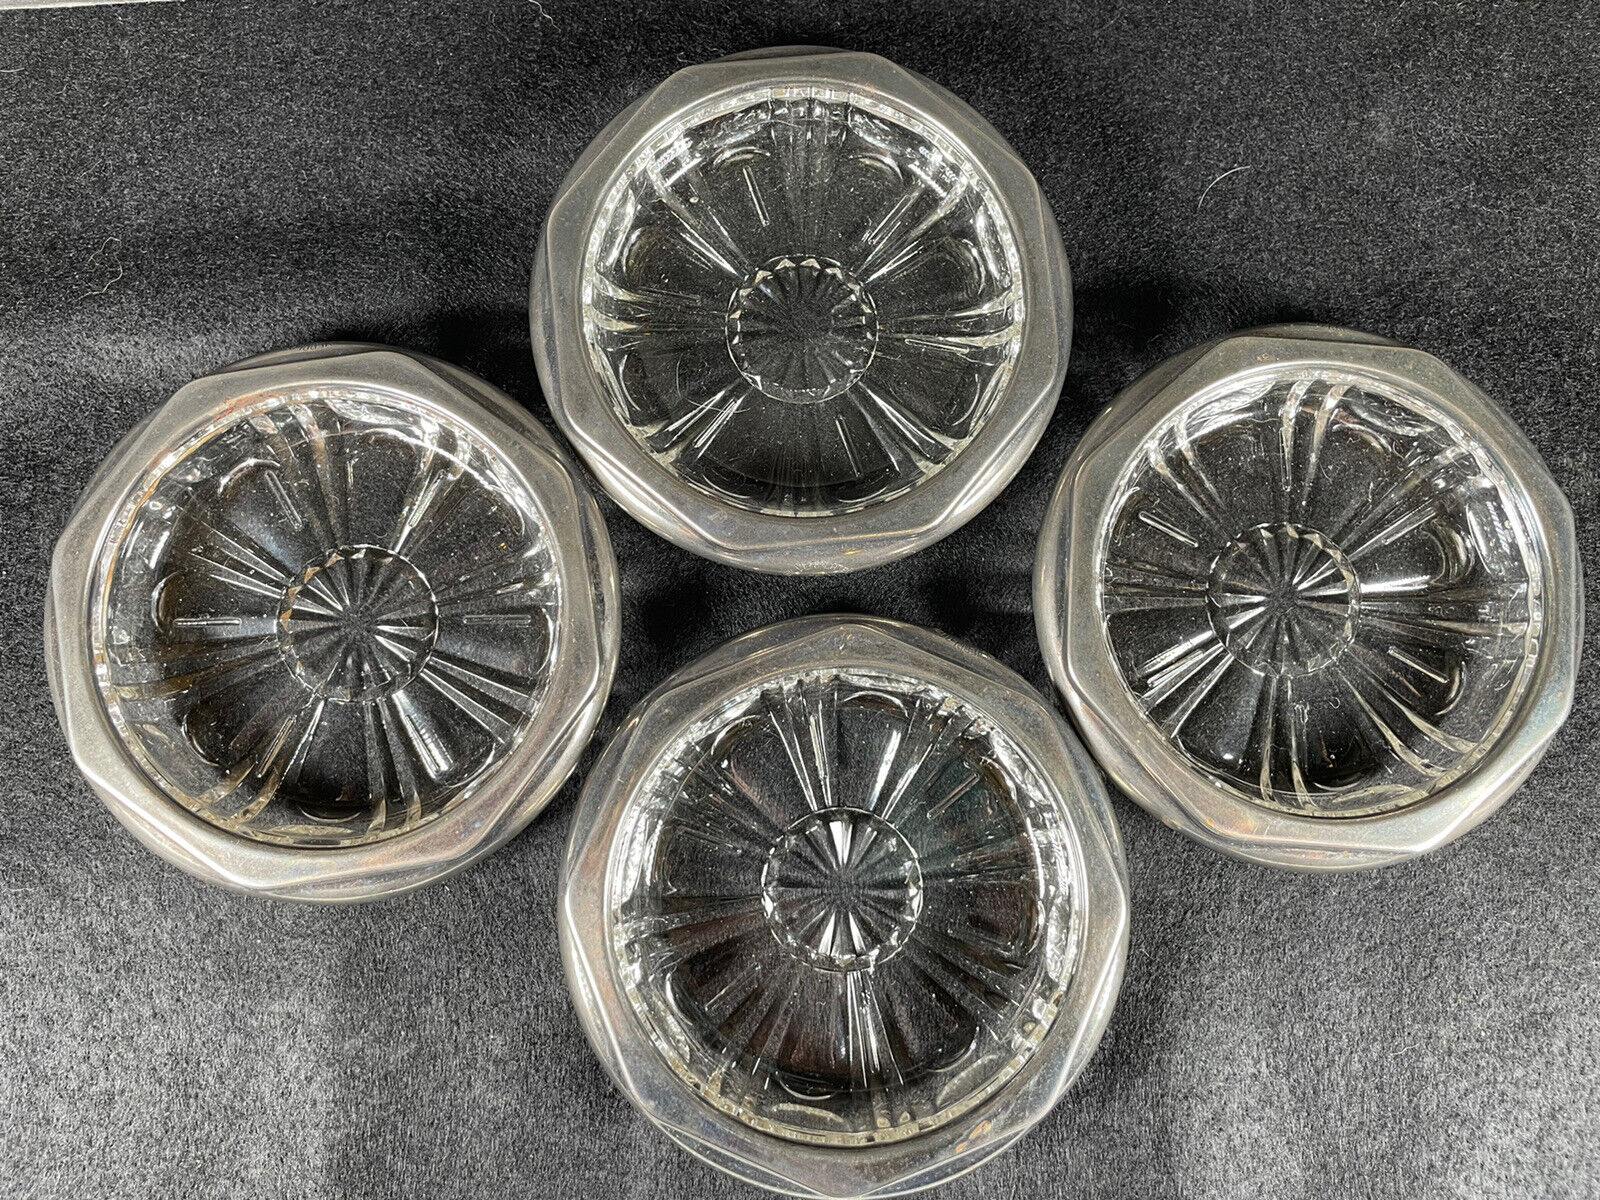 Vintage Silver Plate Rims Starburst Glass Coasters Made in Italy EUC Set of 4